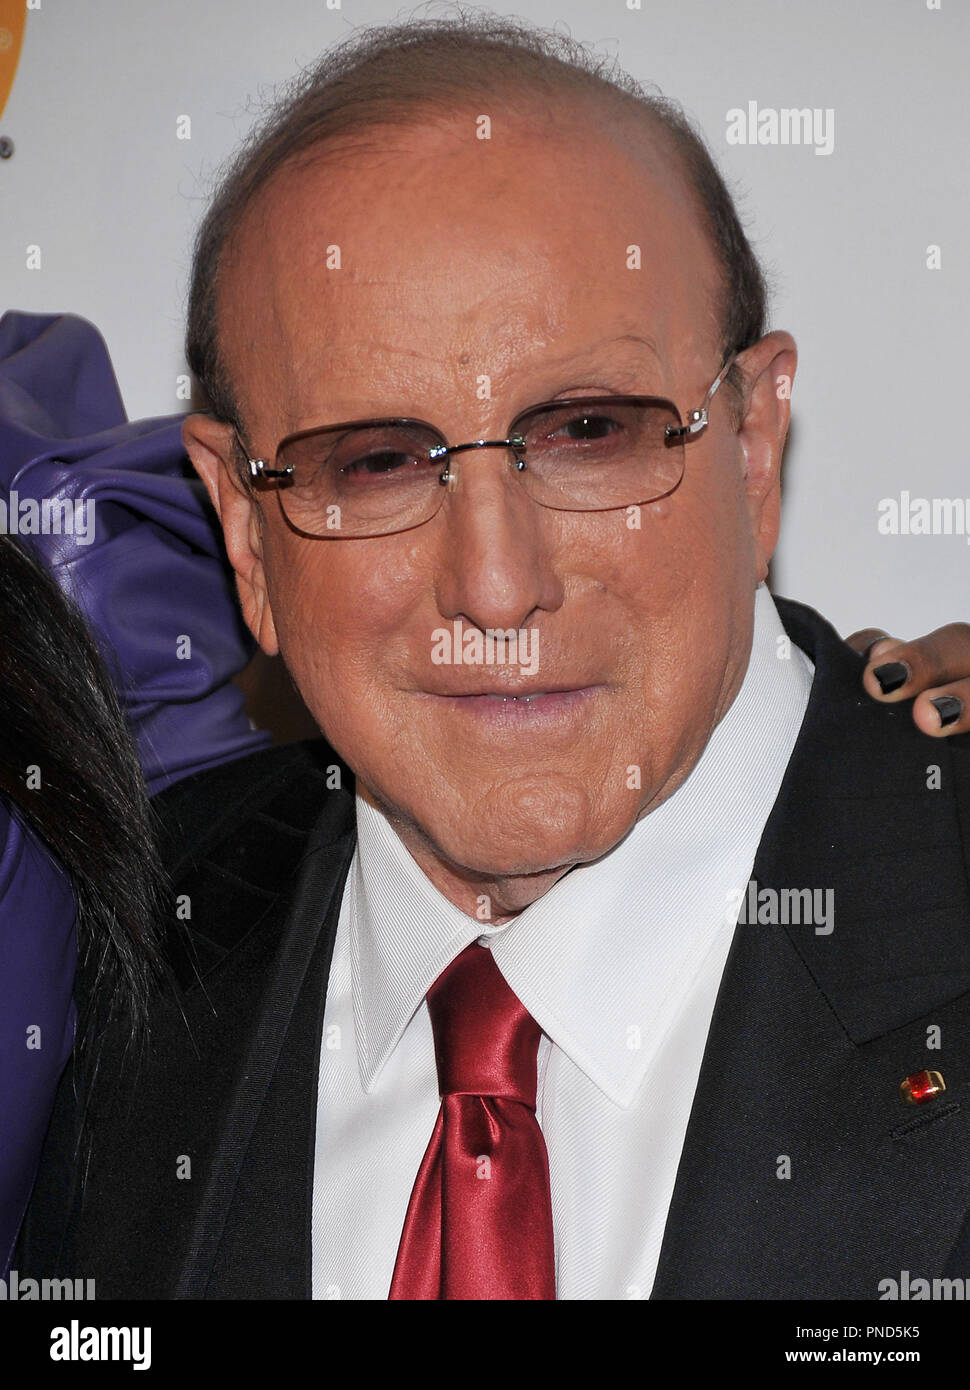 Clive Davis at The Recording Academy and Clive Davis 2010 Pre-Grammy Gala held at the Beverly Hilton Hotel in Beverly Hills, CA. The event took place on Saturday, January 30, 2010. Photo by PRPP Pacific Rim Photo Press. /PictureLux File Reference # Clive Davis 13010PLX   For Editorial Use Only -  All Rights Reserved Stock Photo